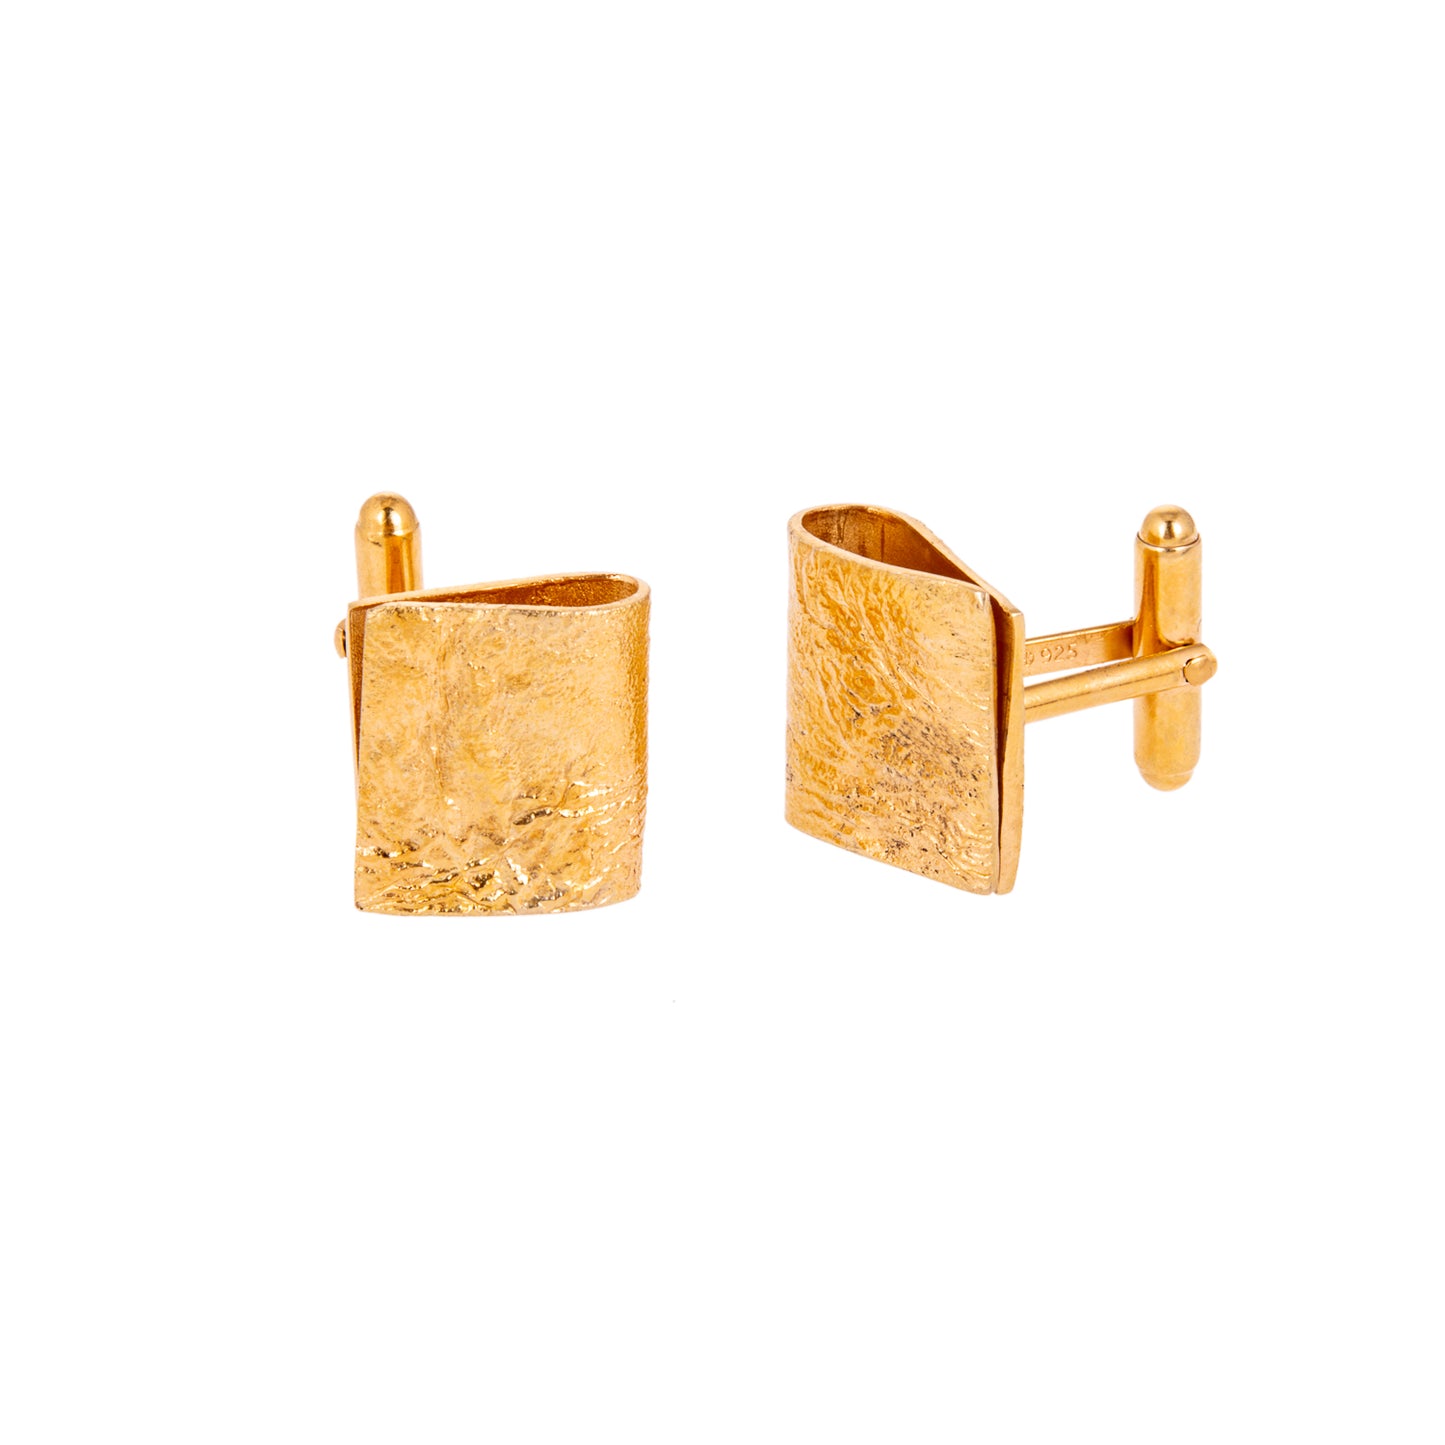 ANNE MORGAN - Fold Cufflinks Gold Plated/Rose Gold Plated